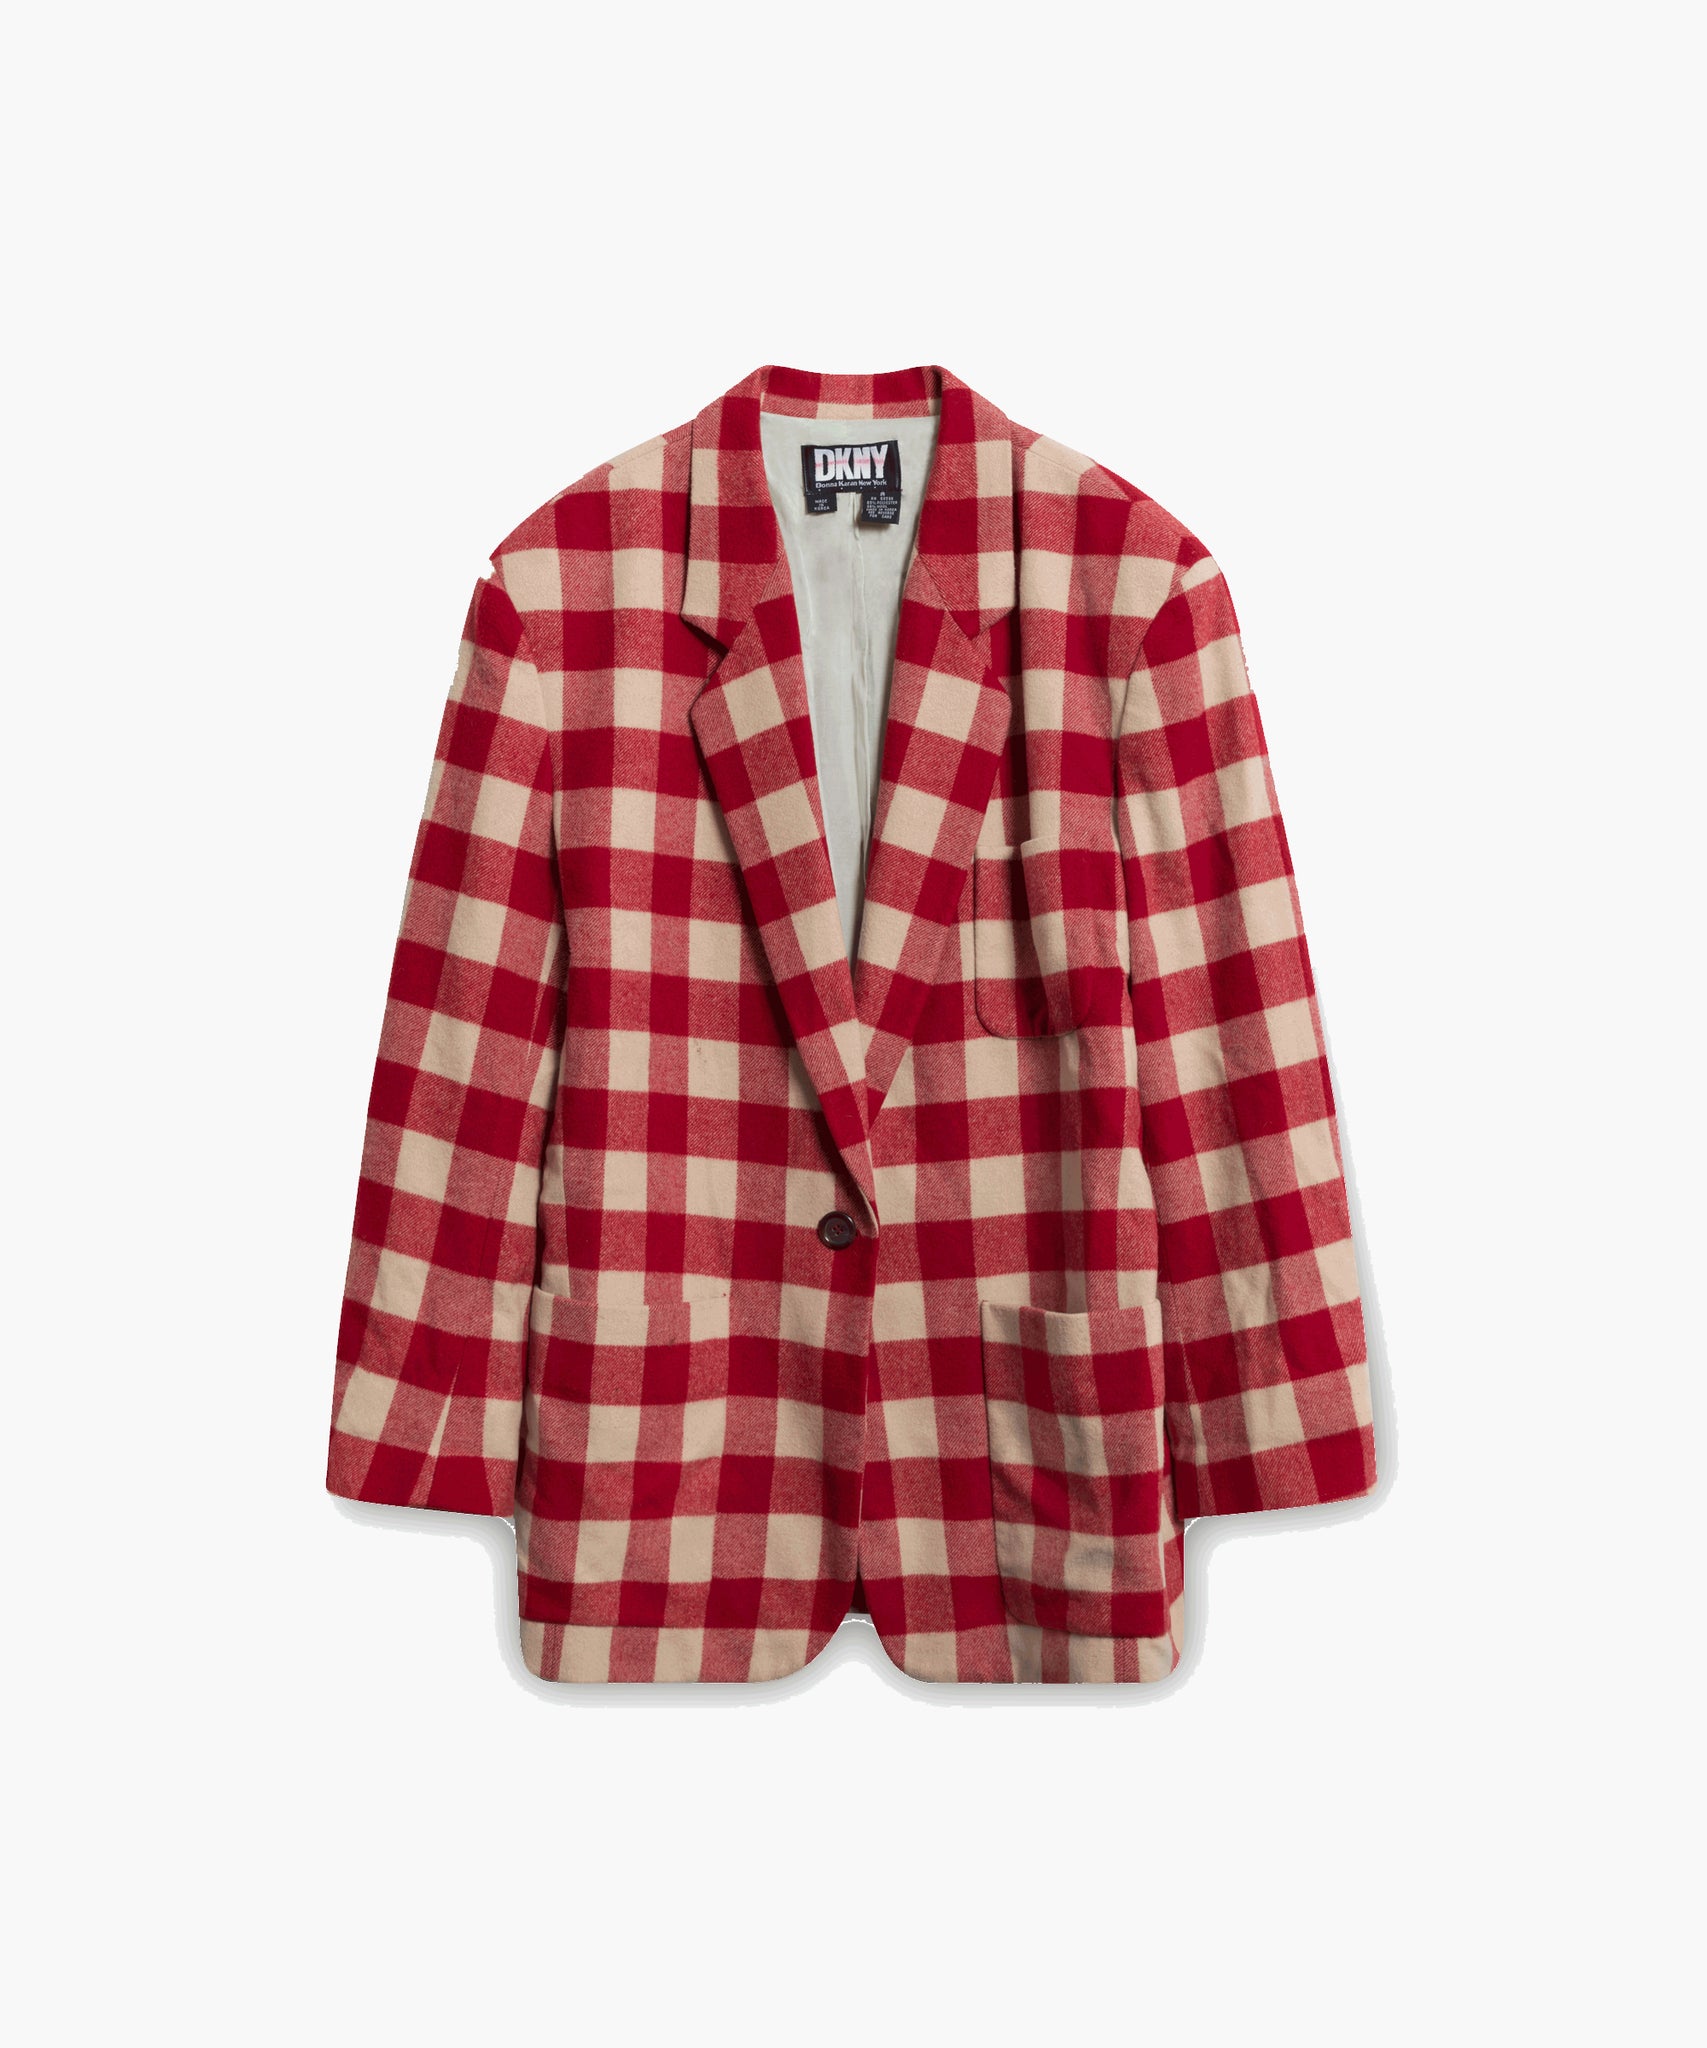 DKNY Red Checkered Blazer and Skirt - Red